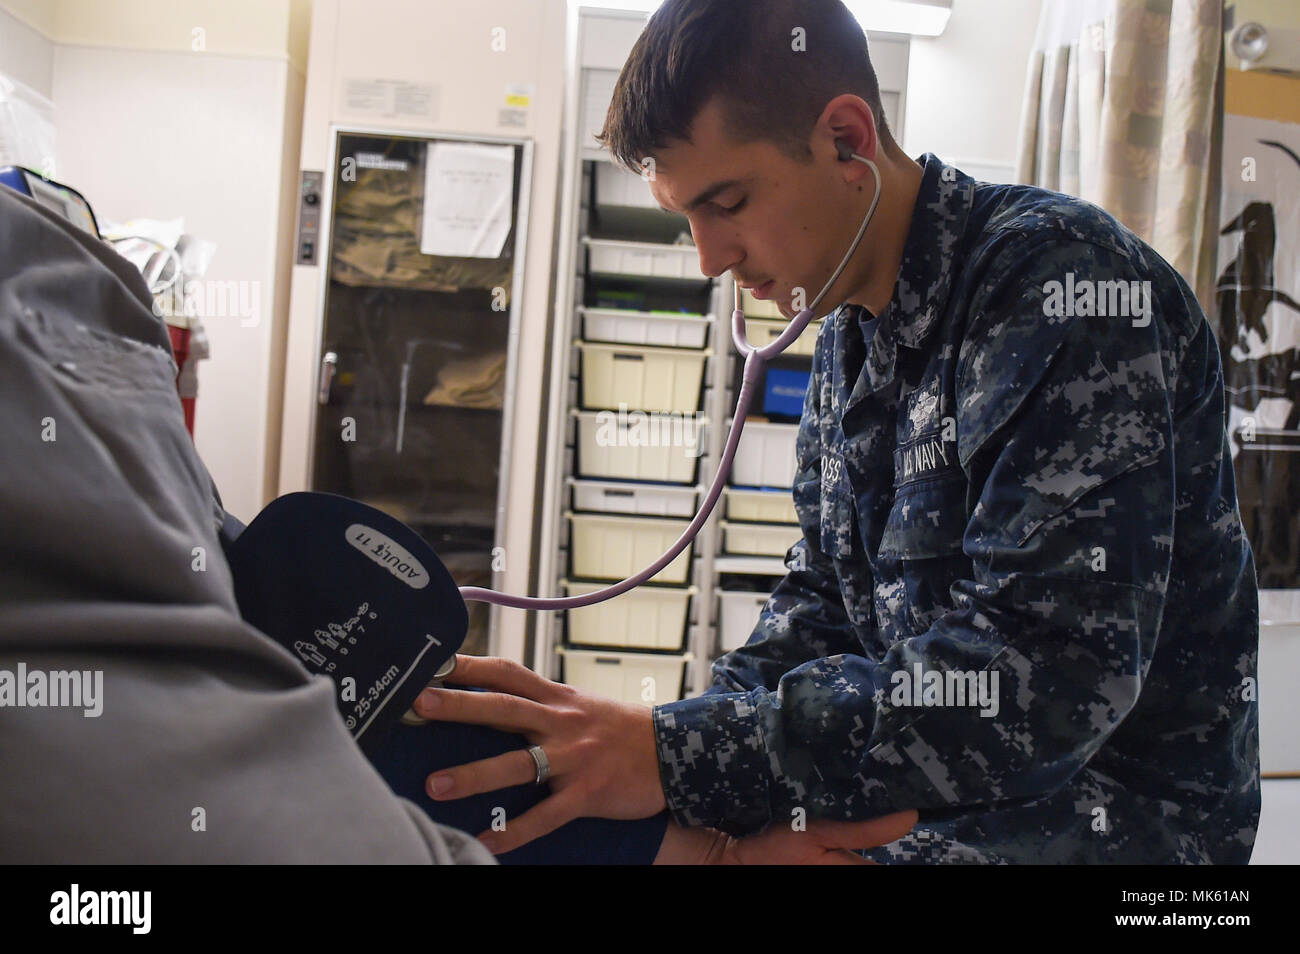 171102-N-NR998-012  BREMERTON, Wash.  Hospital Corpsman 3rd Class Aaron Cross from Milwaukie Ore., manually checks a patient's blood pressure at the Urgent Care Center at Naval Hospital Bremerton. (U.S. Navy Photo by Mass Communication 1st Class Gretchen M. Albrecht/ Released) Stock Photo